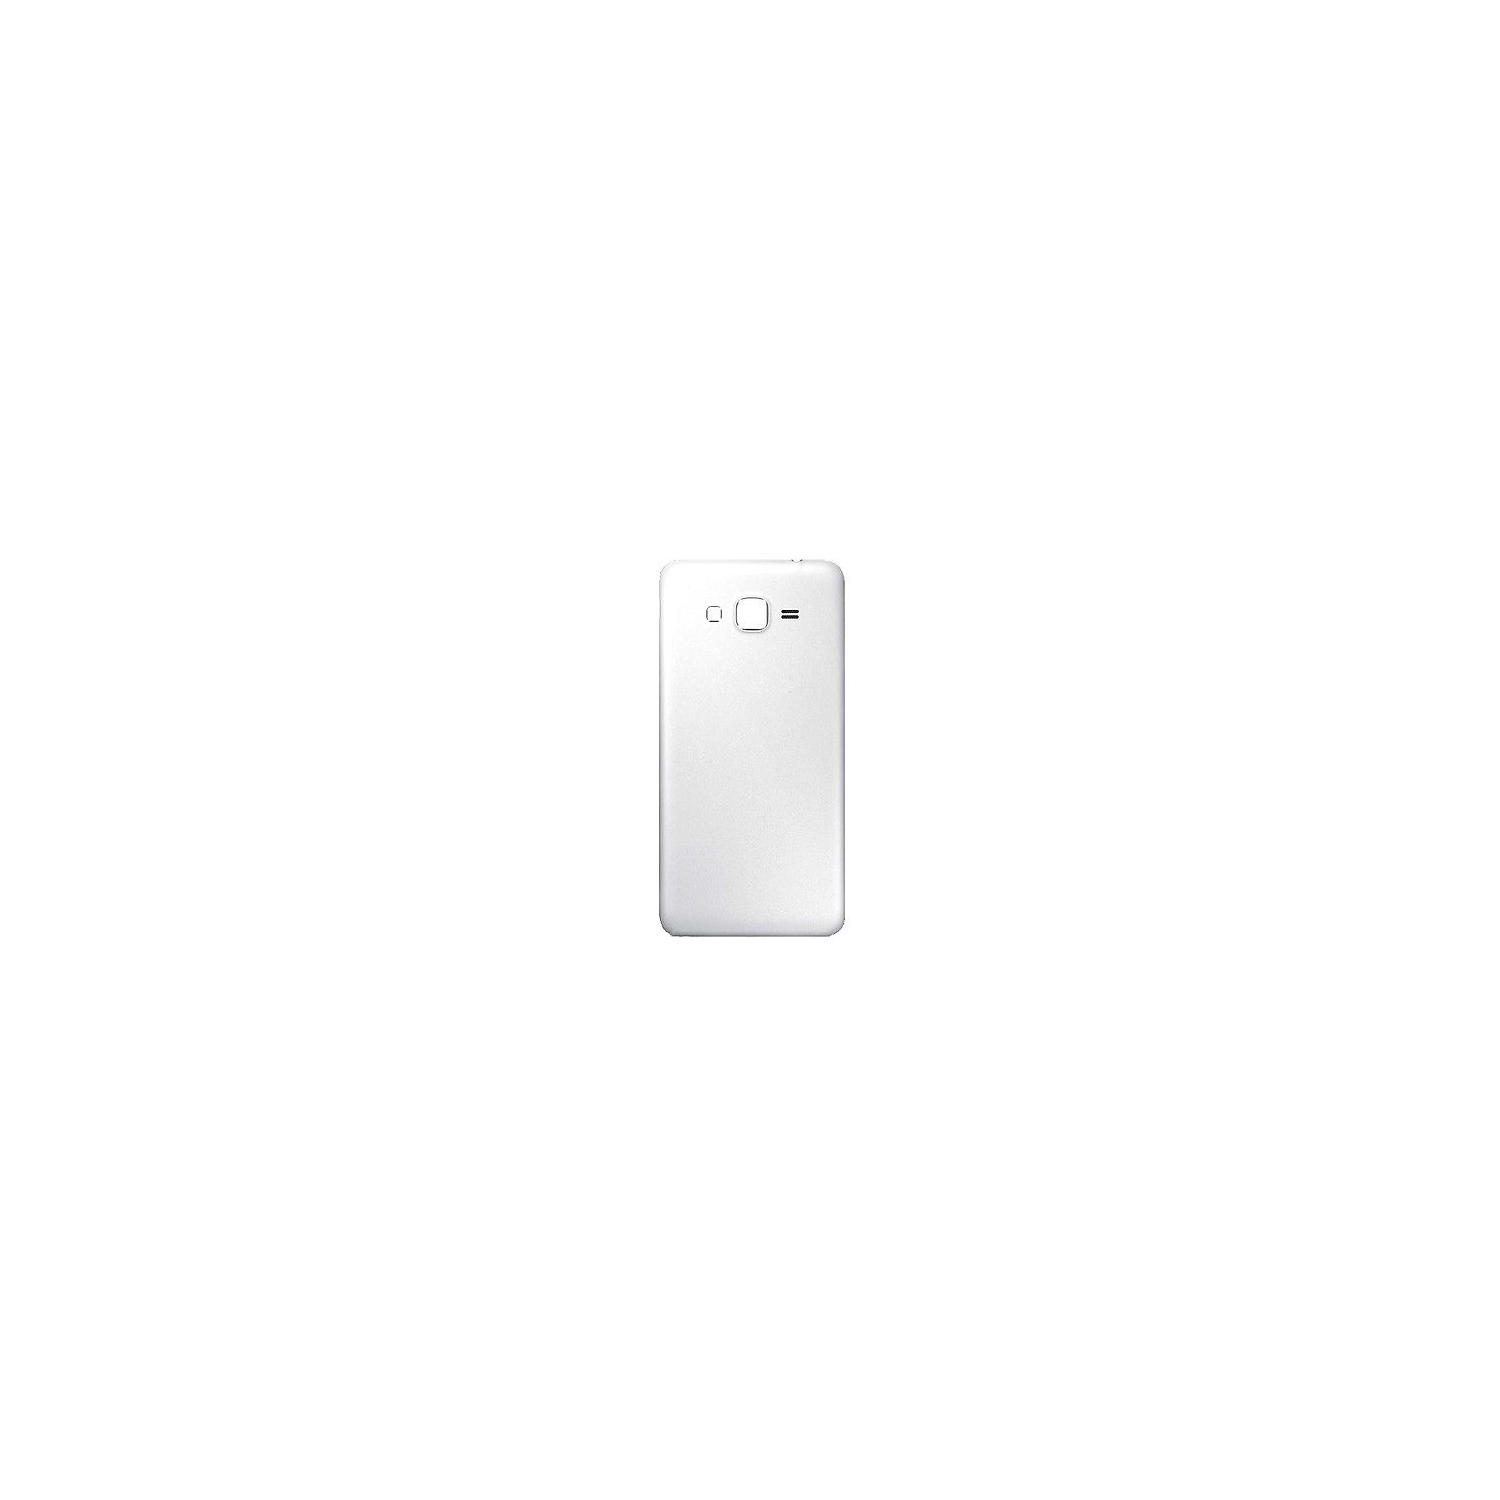 Samsung Galaxy Grand Prime G530 Back Battery Door Cover - White